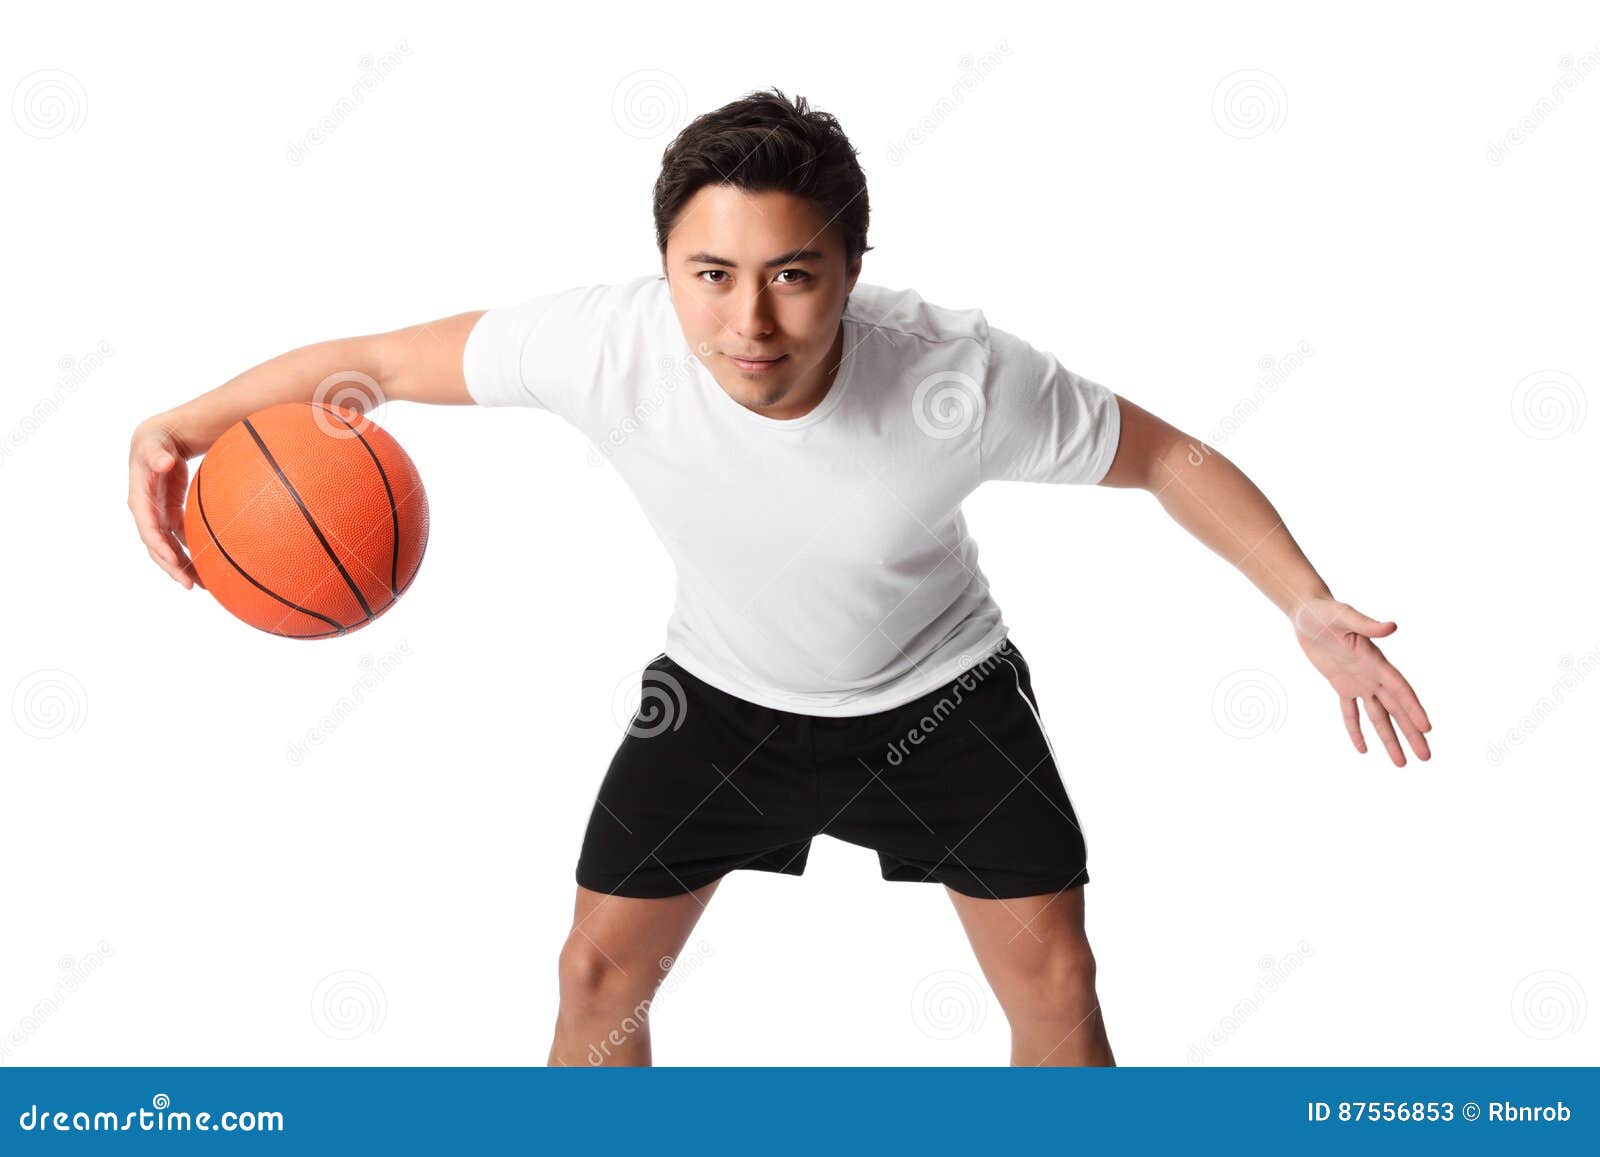 13,890 Basketball Shorts Images, Stock Photos, 3D objects, & Vectors